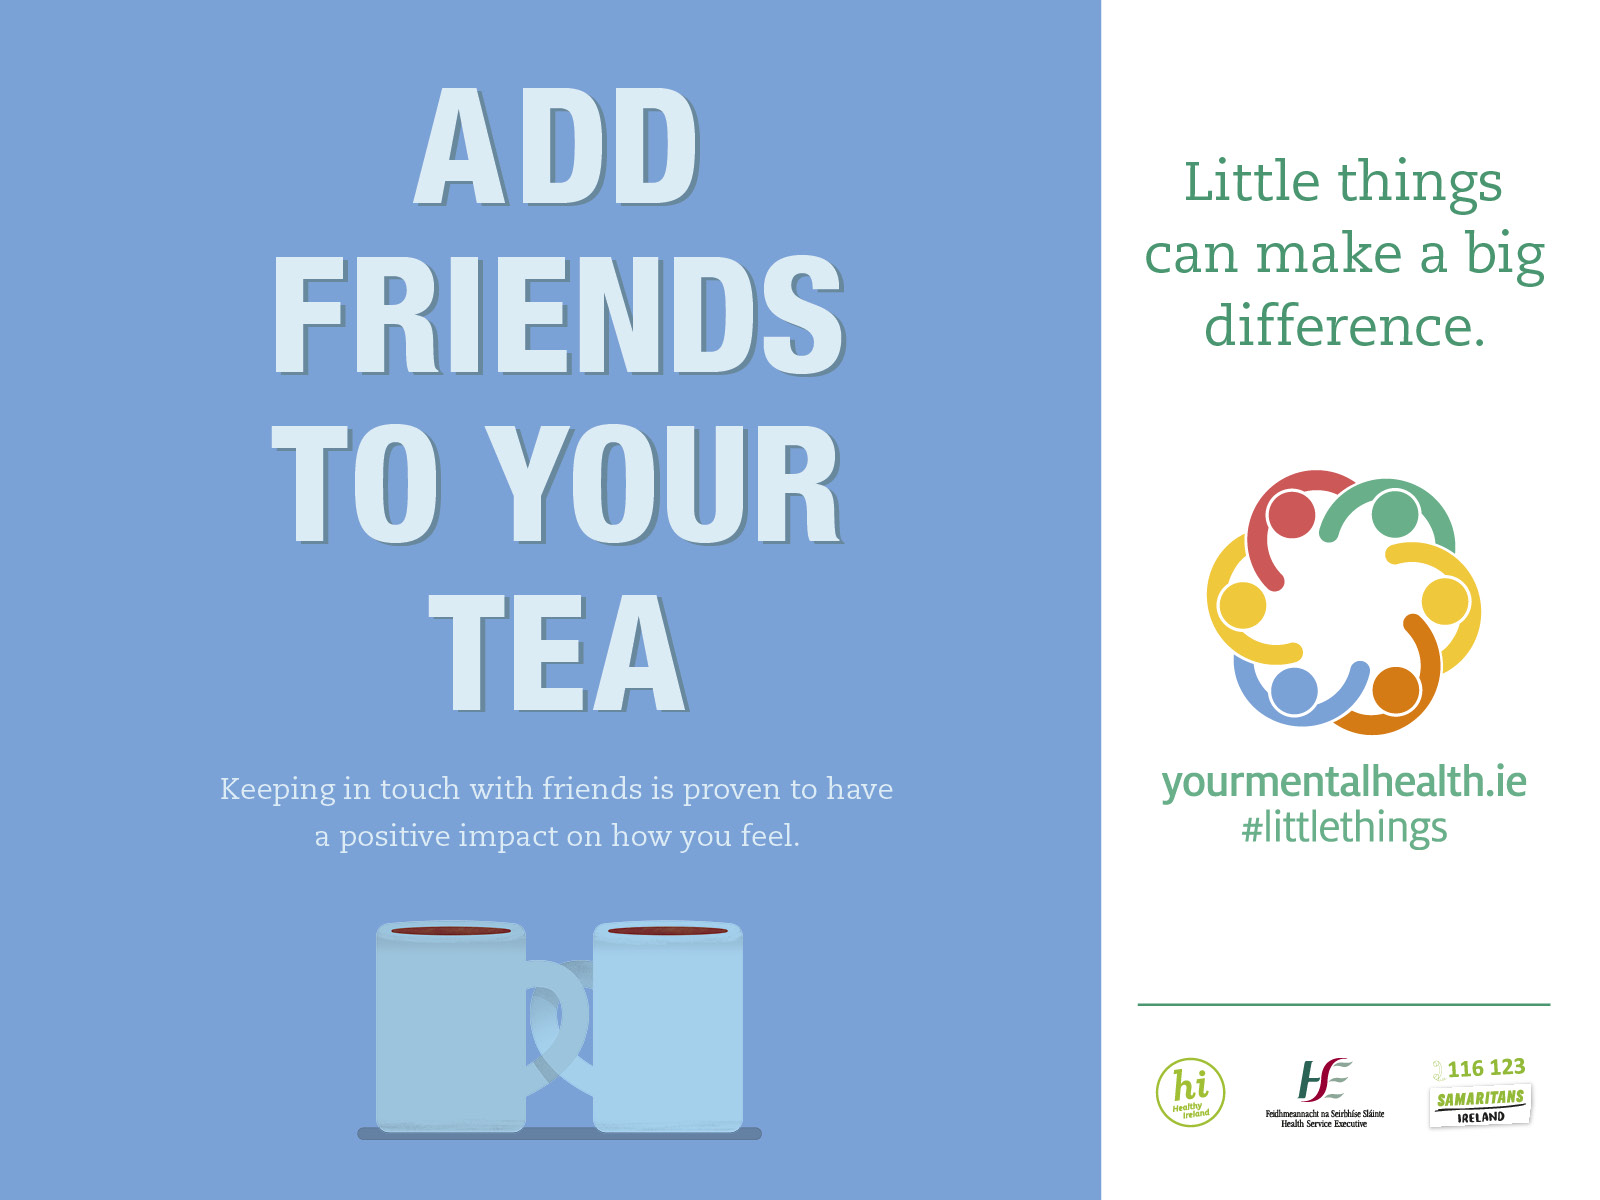 Add Friends to Your Tea